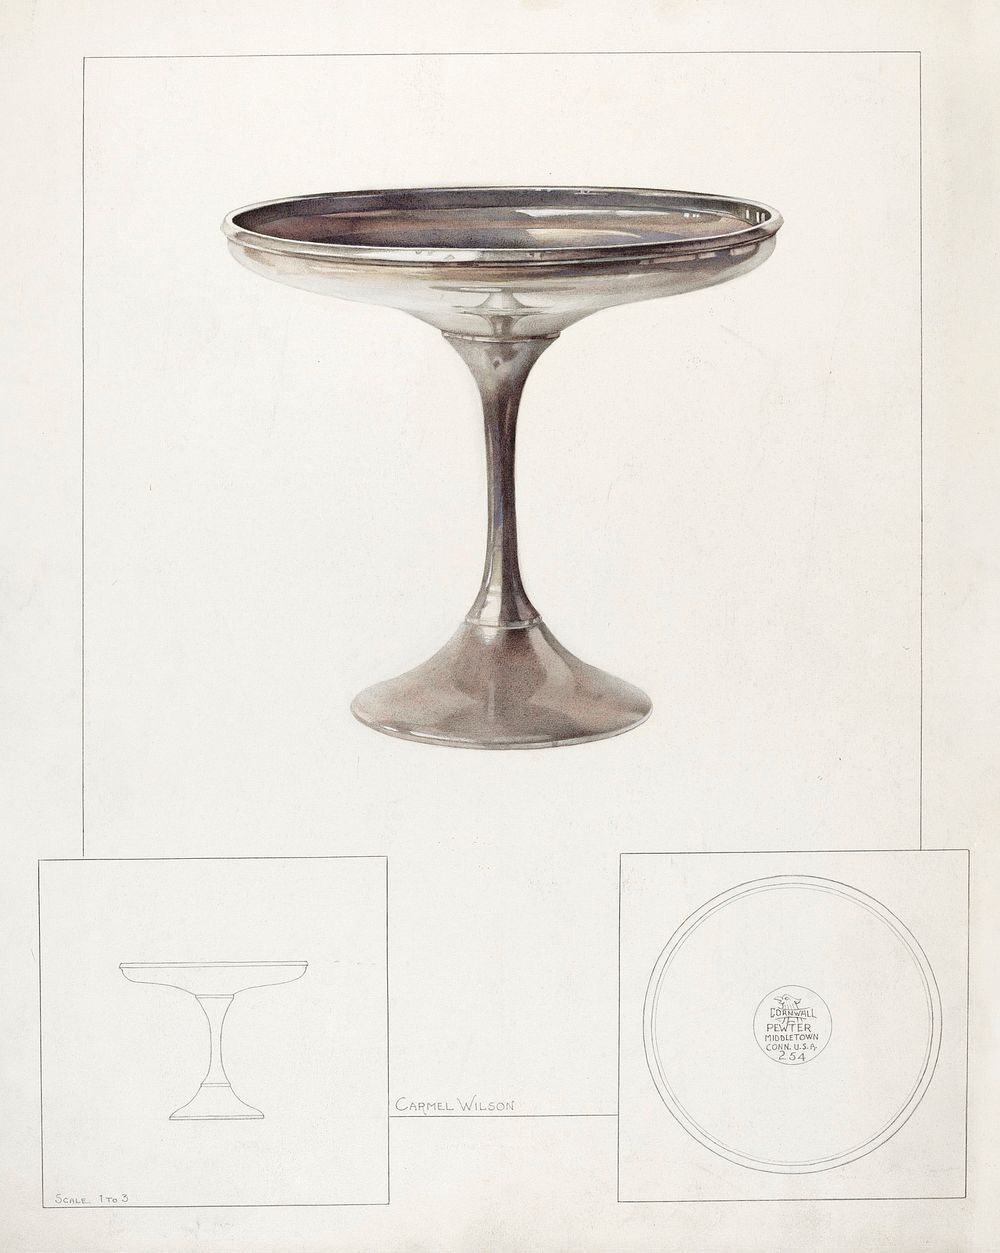 Pewter Compote (ca. 1937) by Carmel Wilson. Original from The National Gallery of Art. Digitally enhanced by rawpixel.